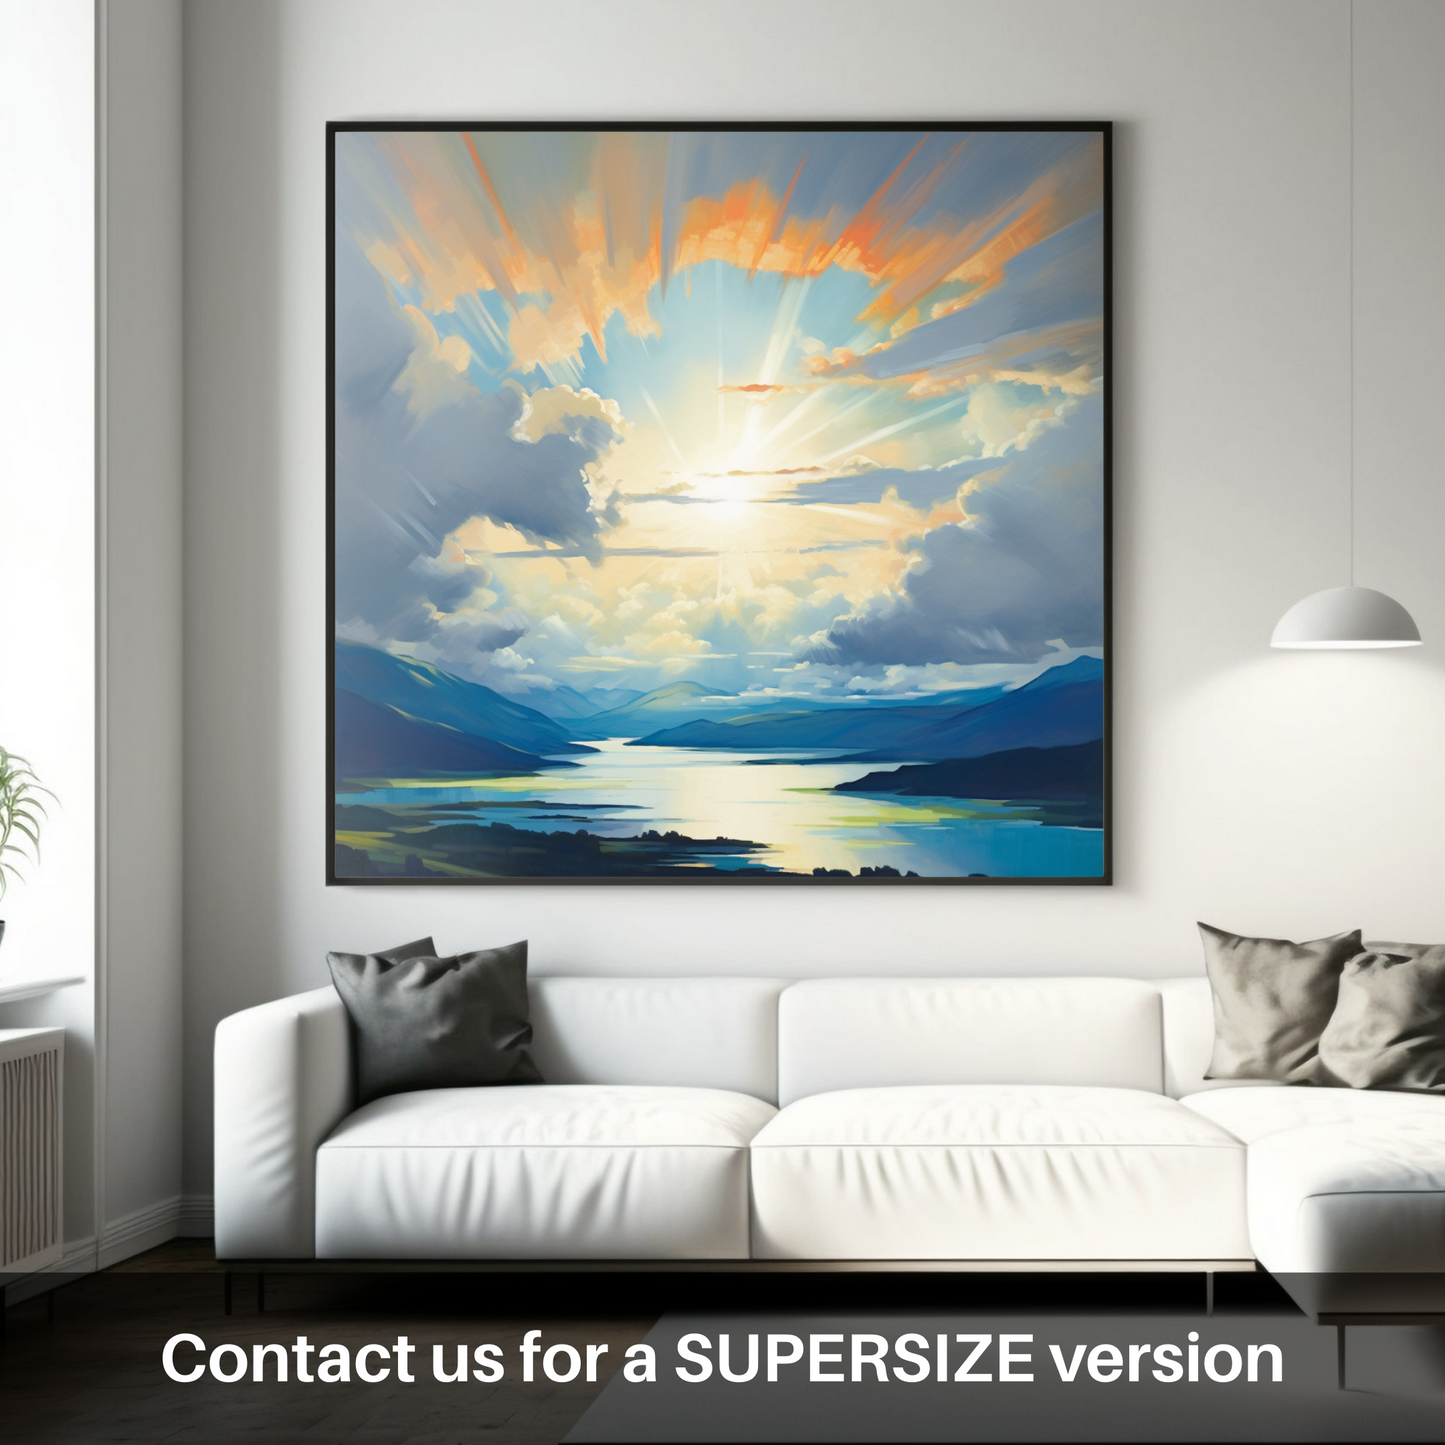 Huge supersize print of Sun rays through clouds above Loch Lomond